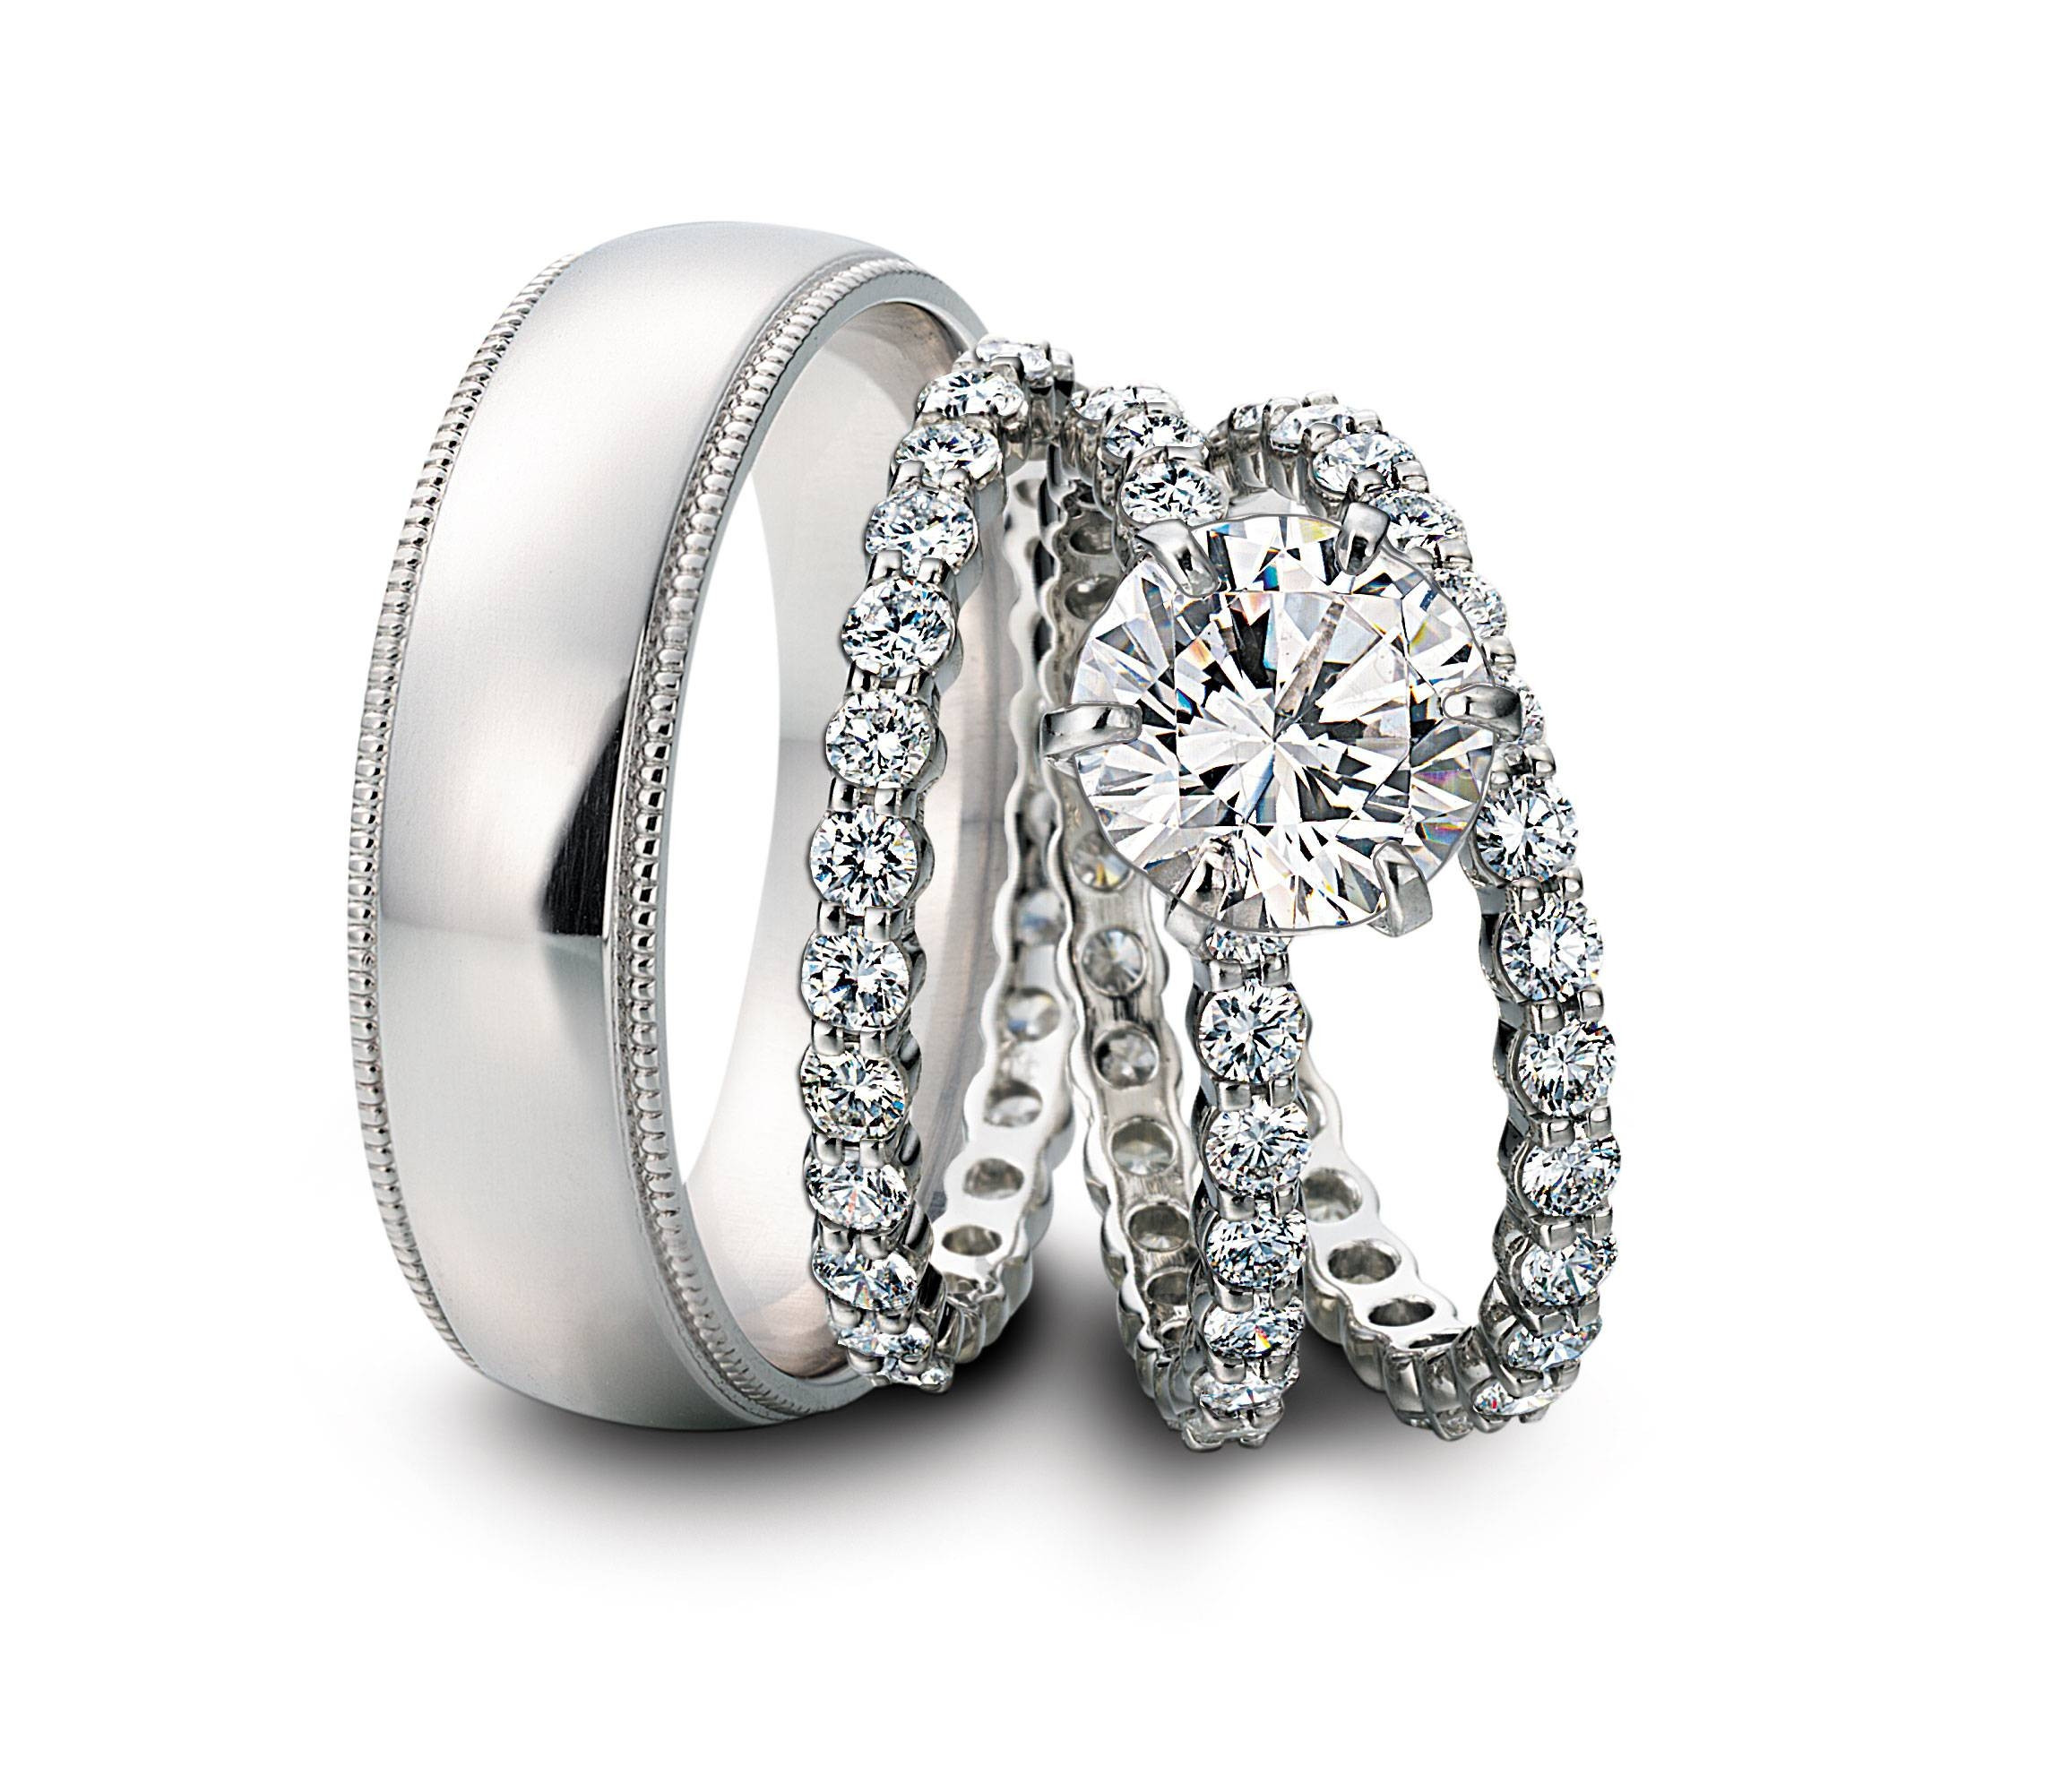 Wedding Rings Sets Cheap
 15 Inspirations of Cheap Wedding Bands Sets His And Hers